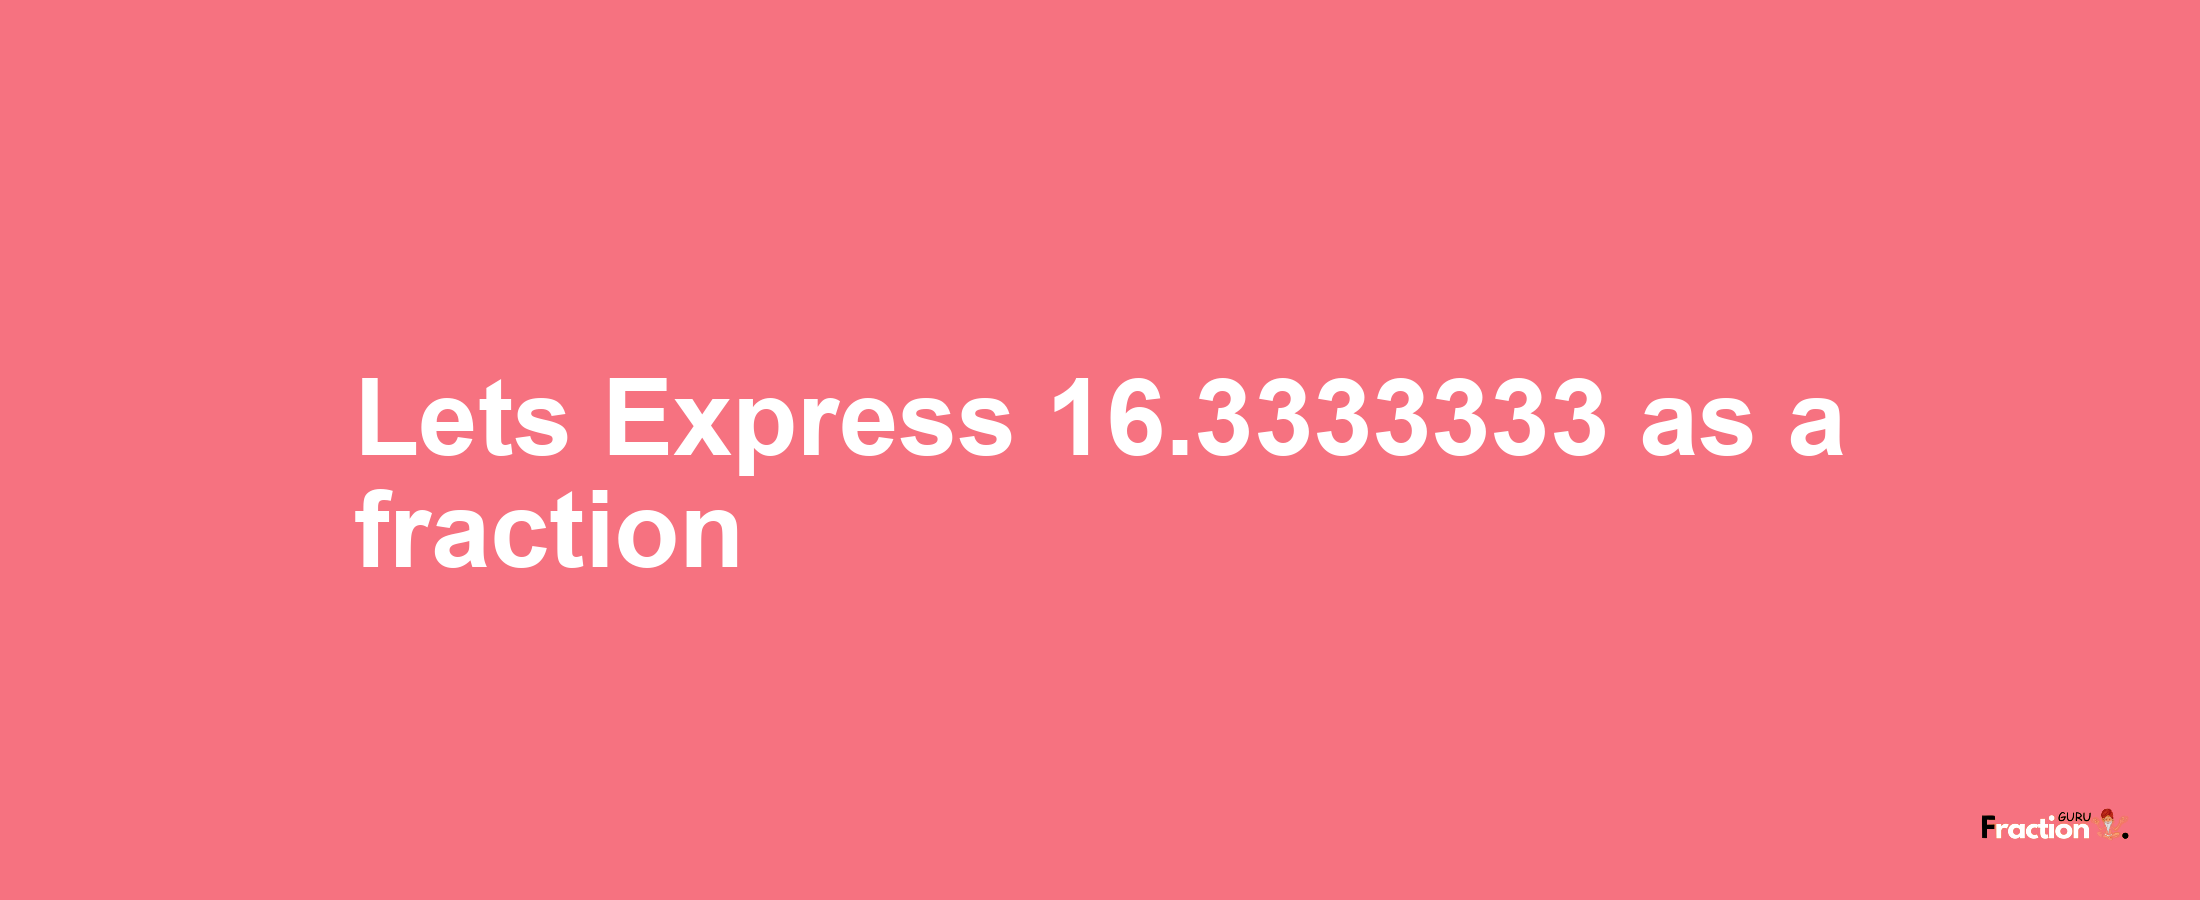 Lets Express 16.3333333 as afraction